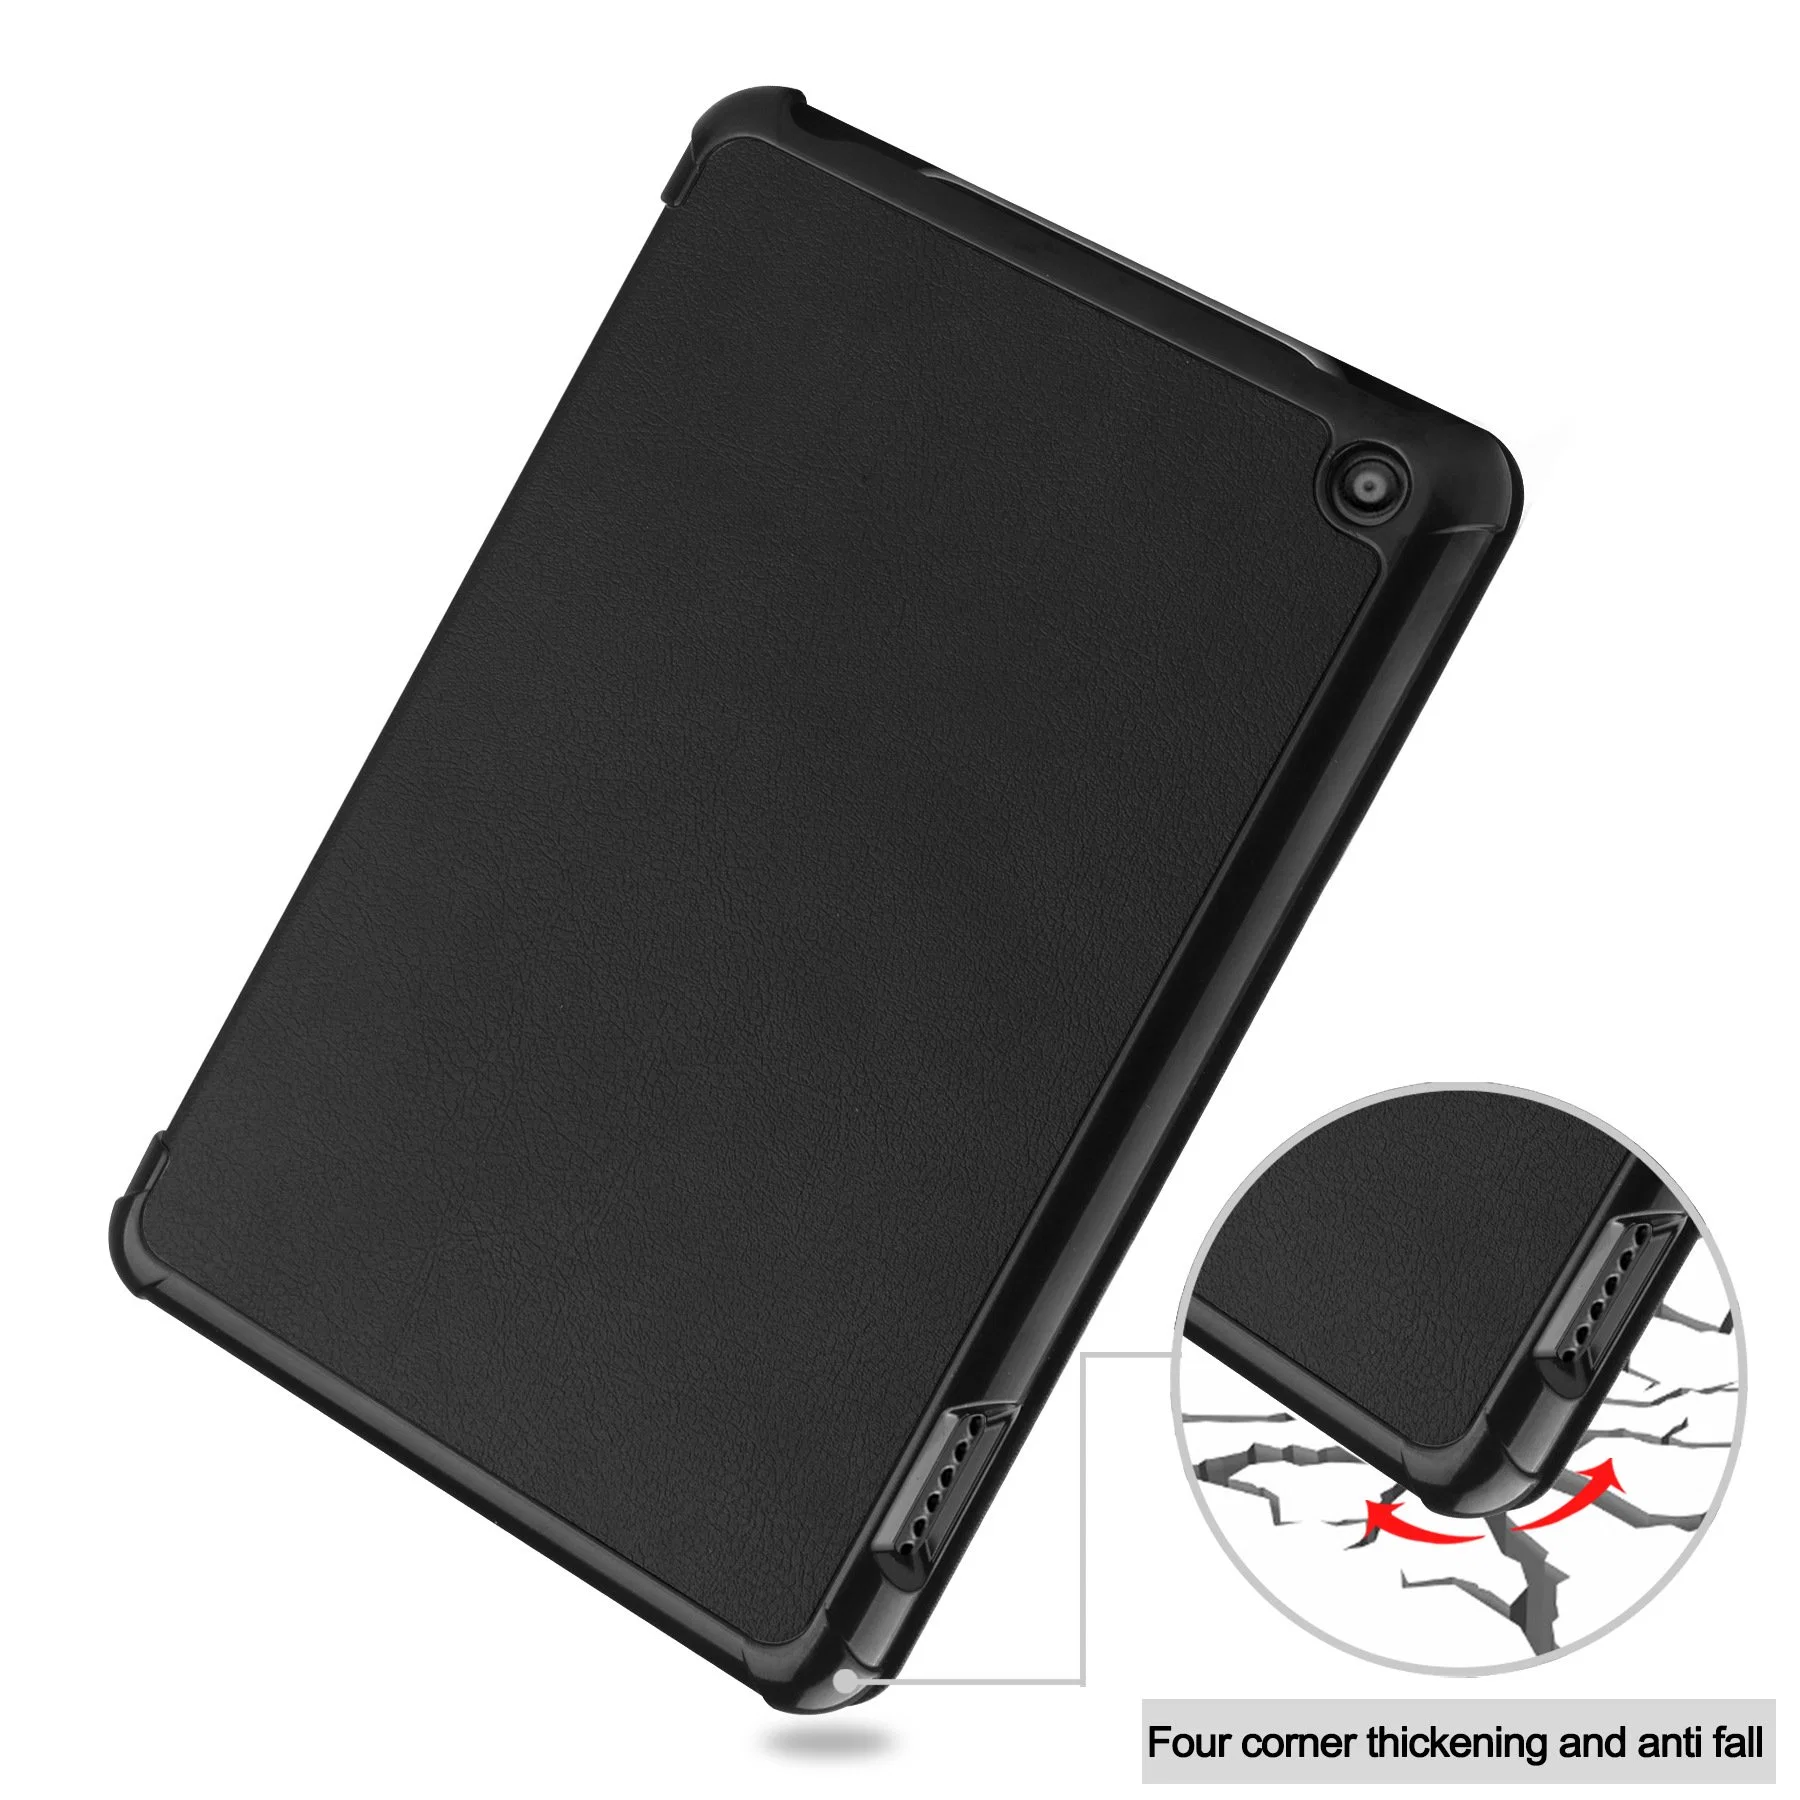 Auto Wake/Sleep PU Leather Trifold Stand Cover for Amazon Kindle Fire 7 2022 Release Tablet Case